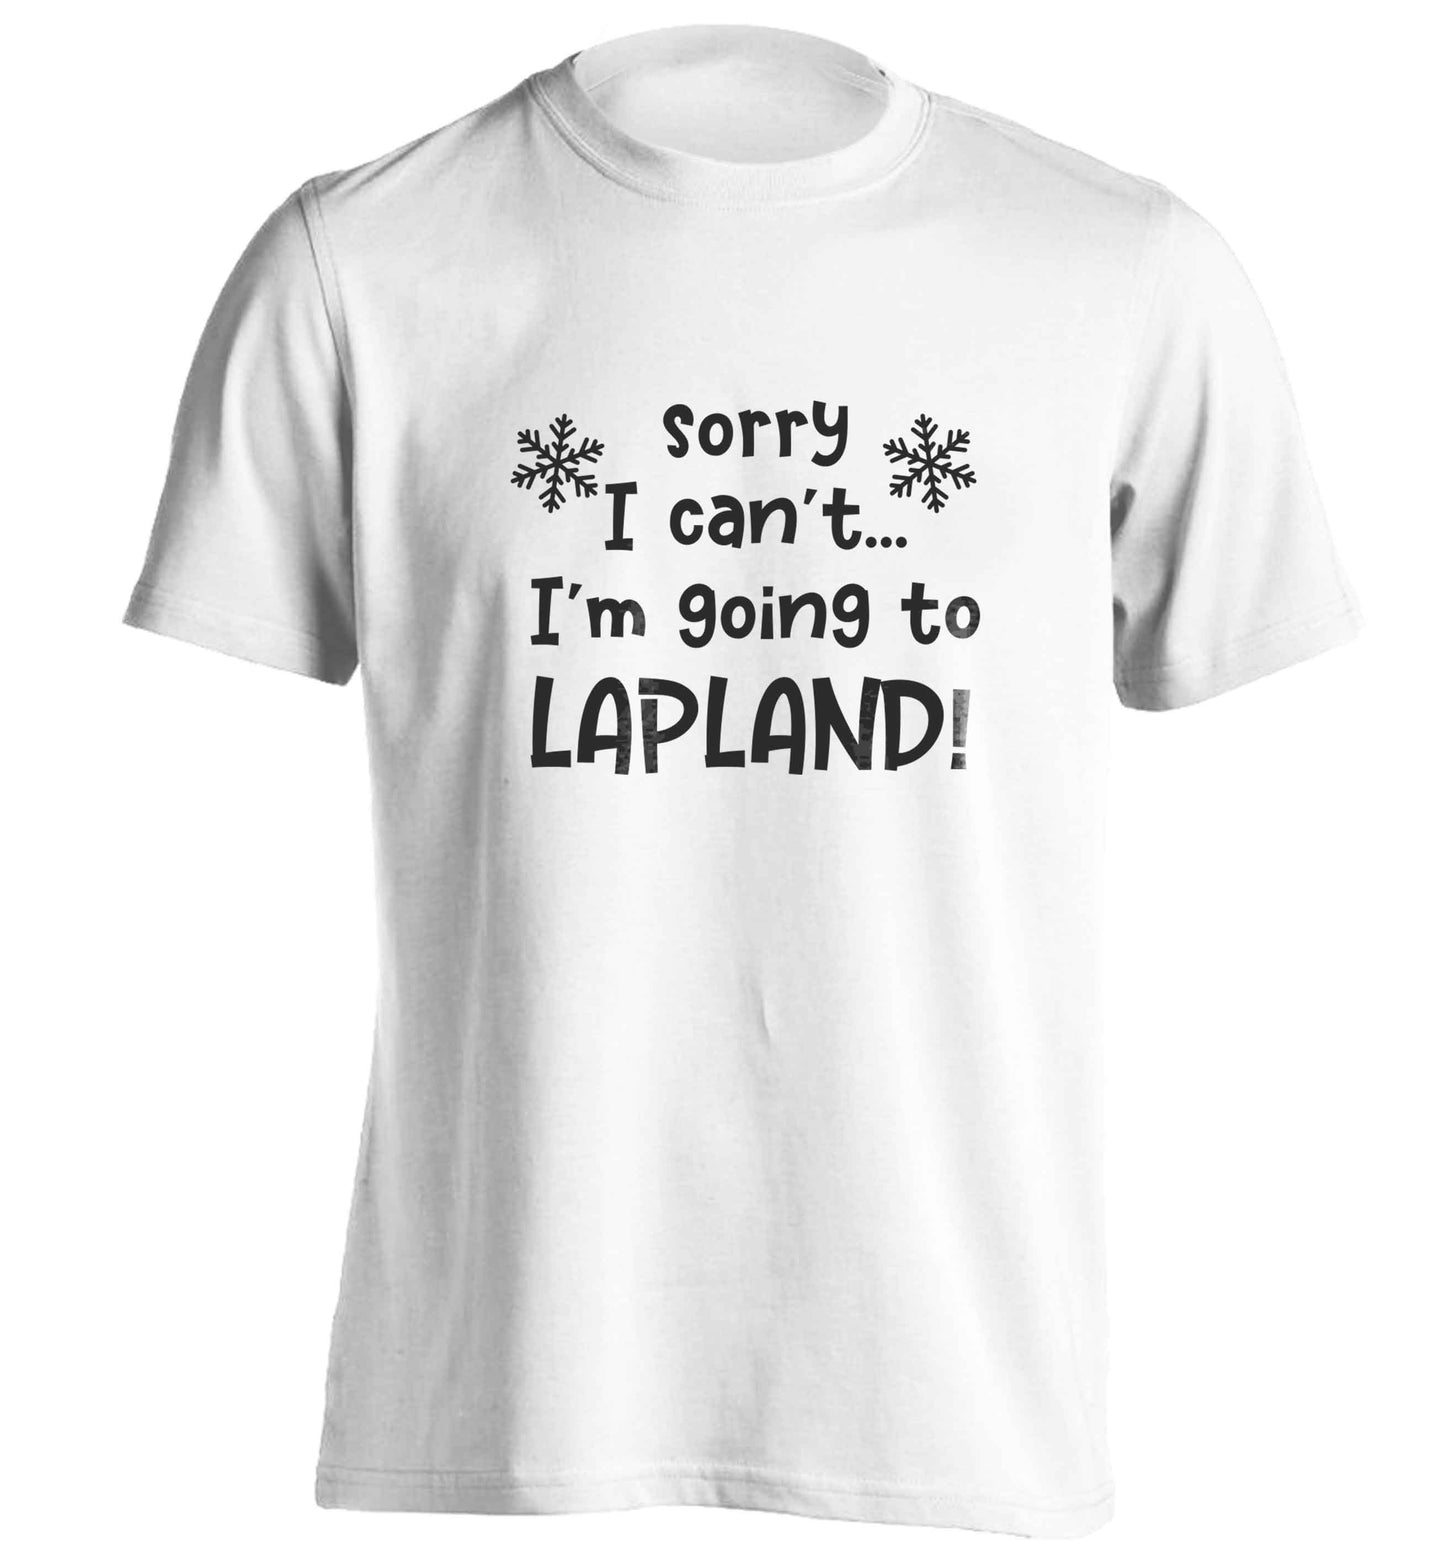 Sorry I can't I'm going to Lapland adults unisex white Tshirt 2XL